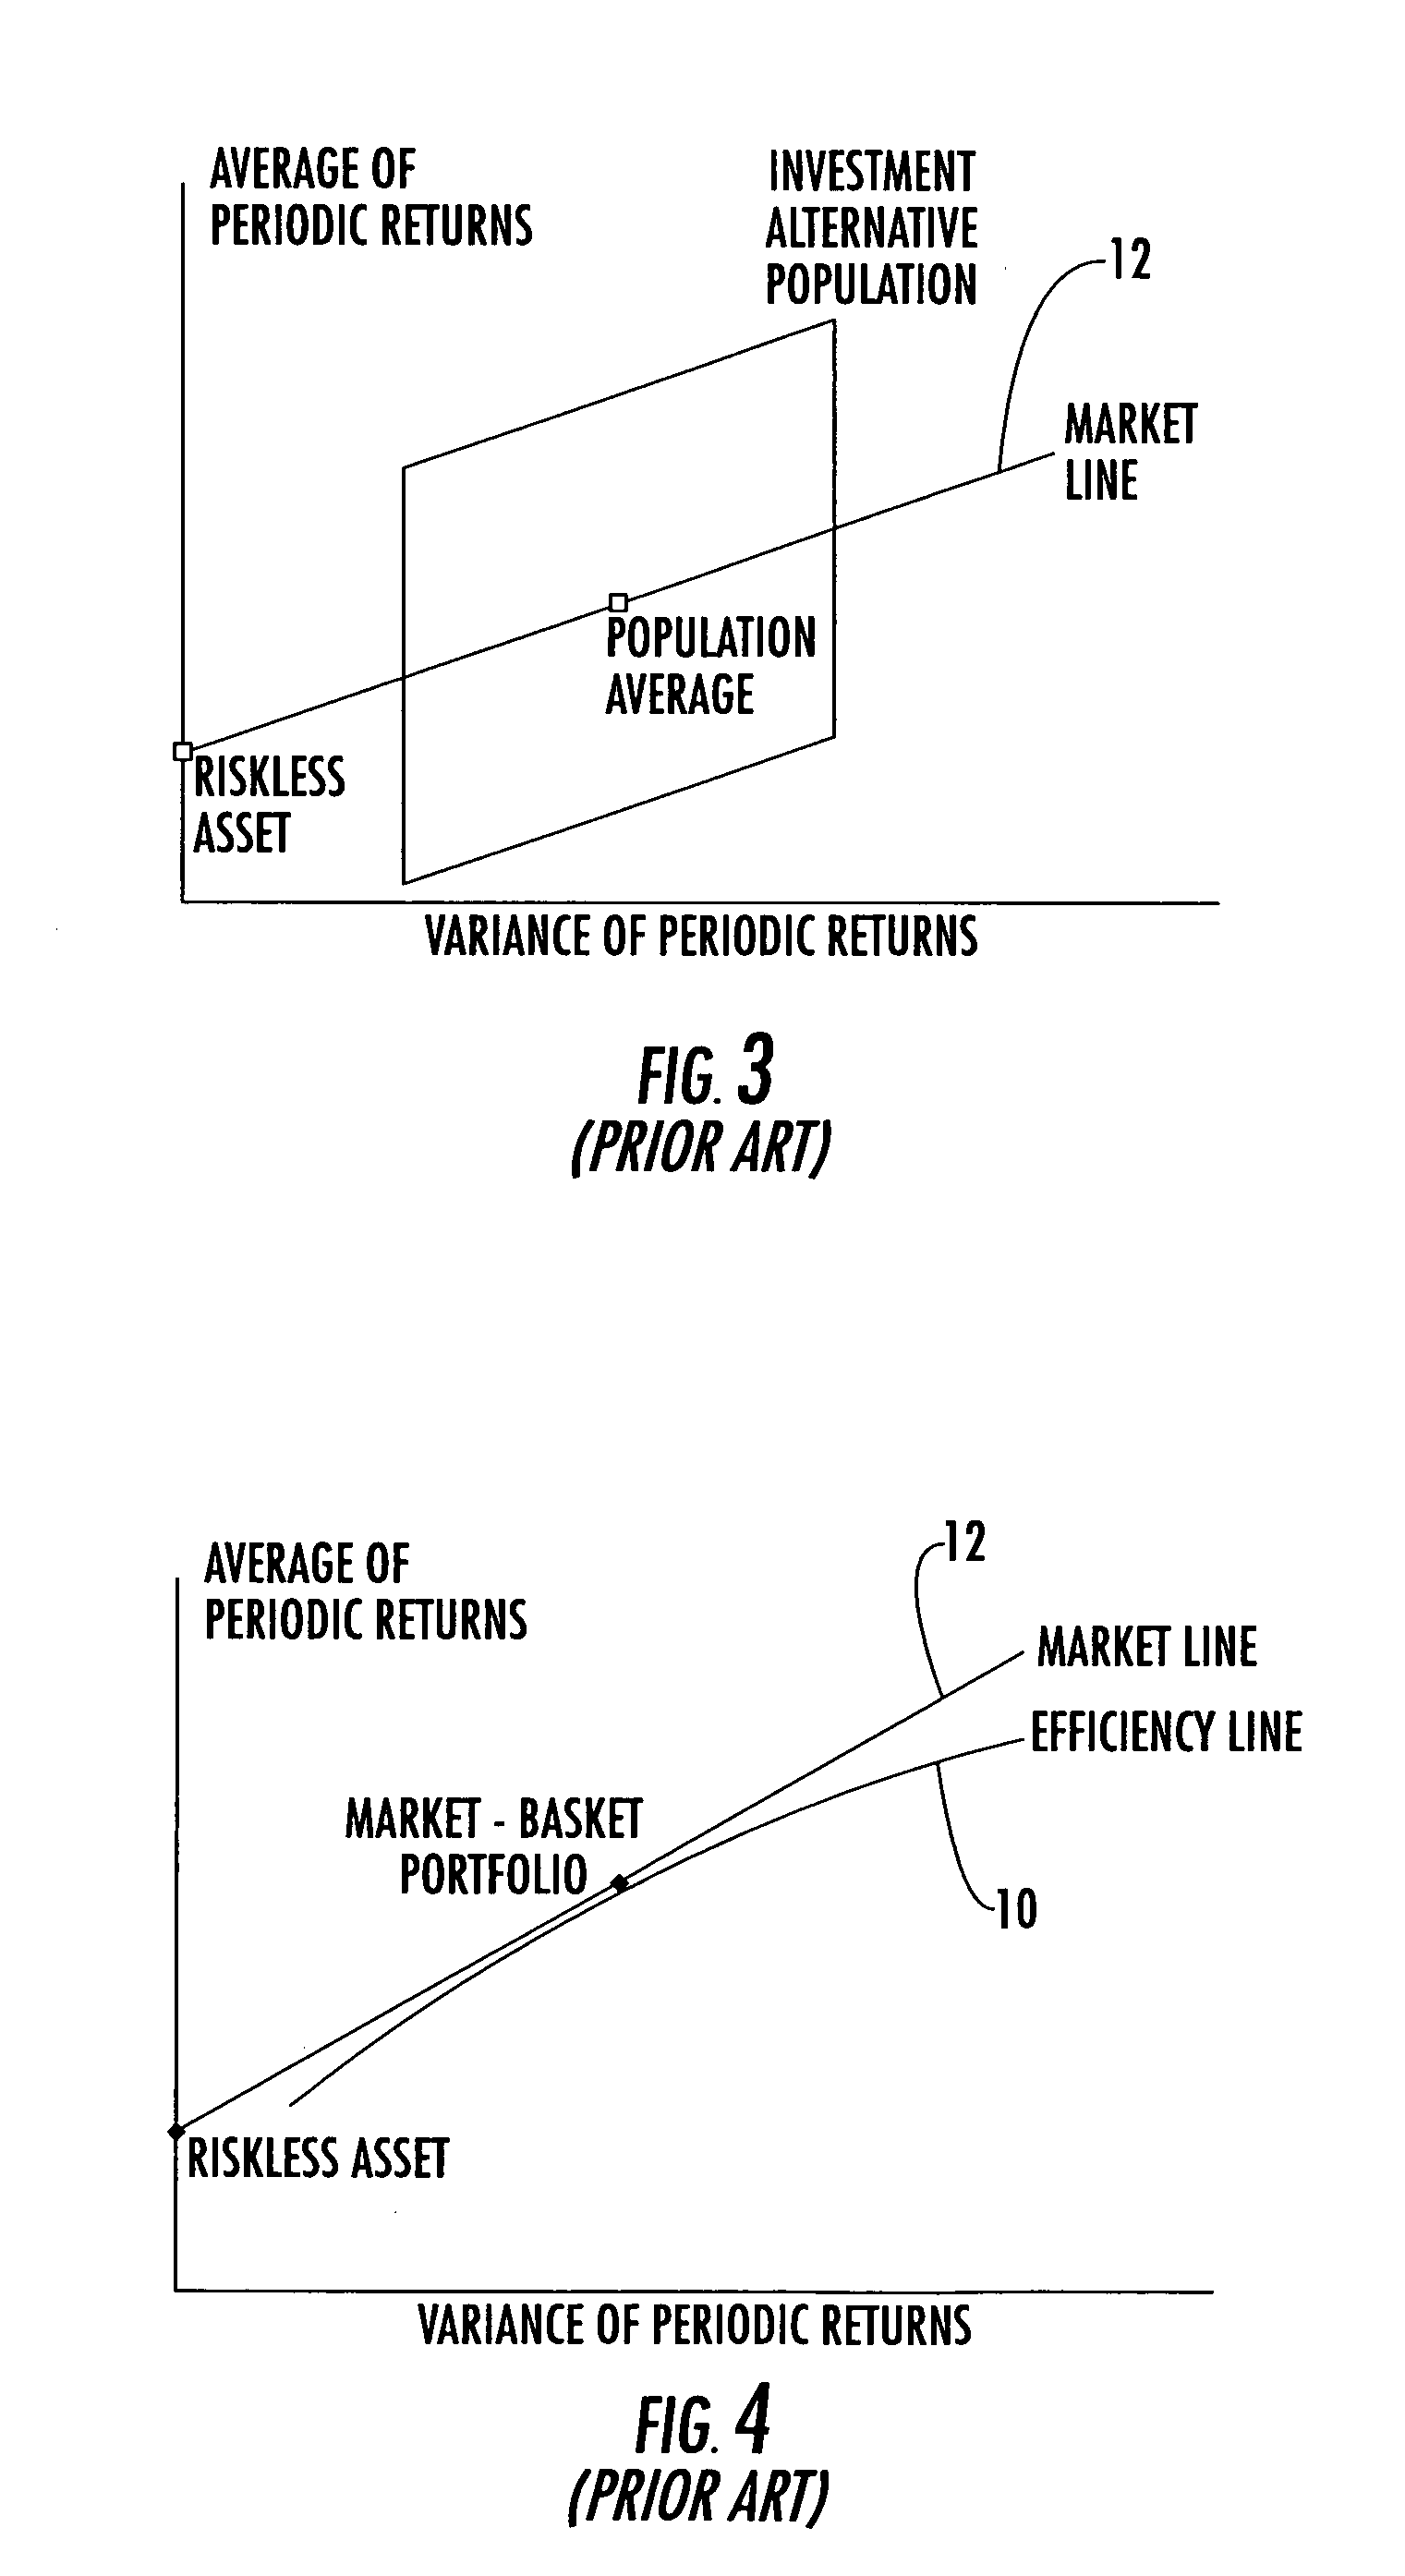 Method for evaluating relative investment performance from internal benchmarks